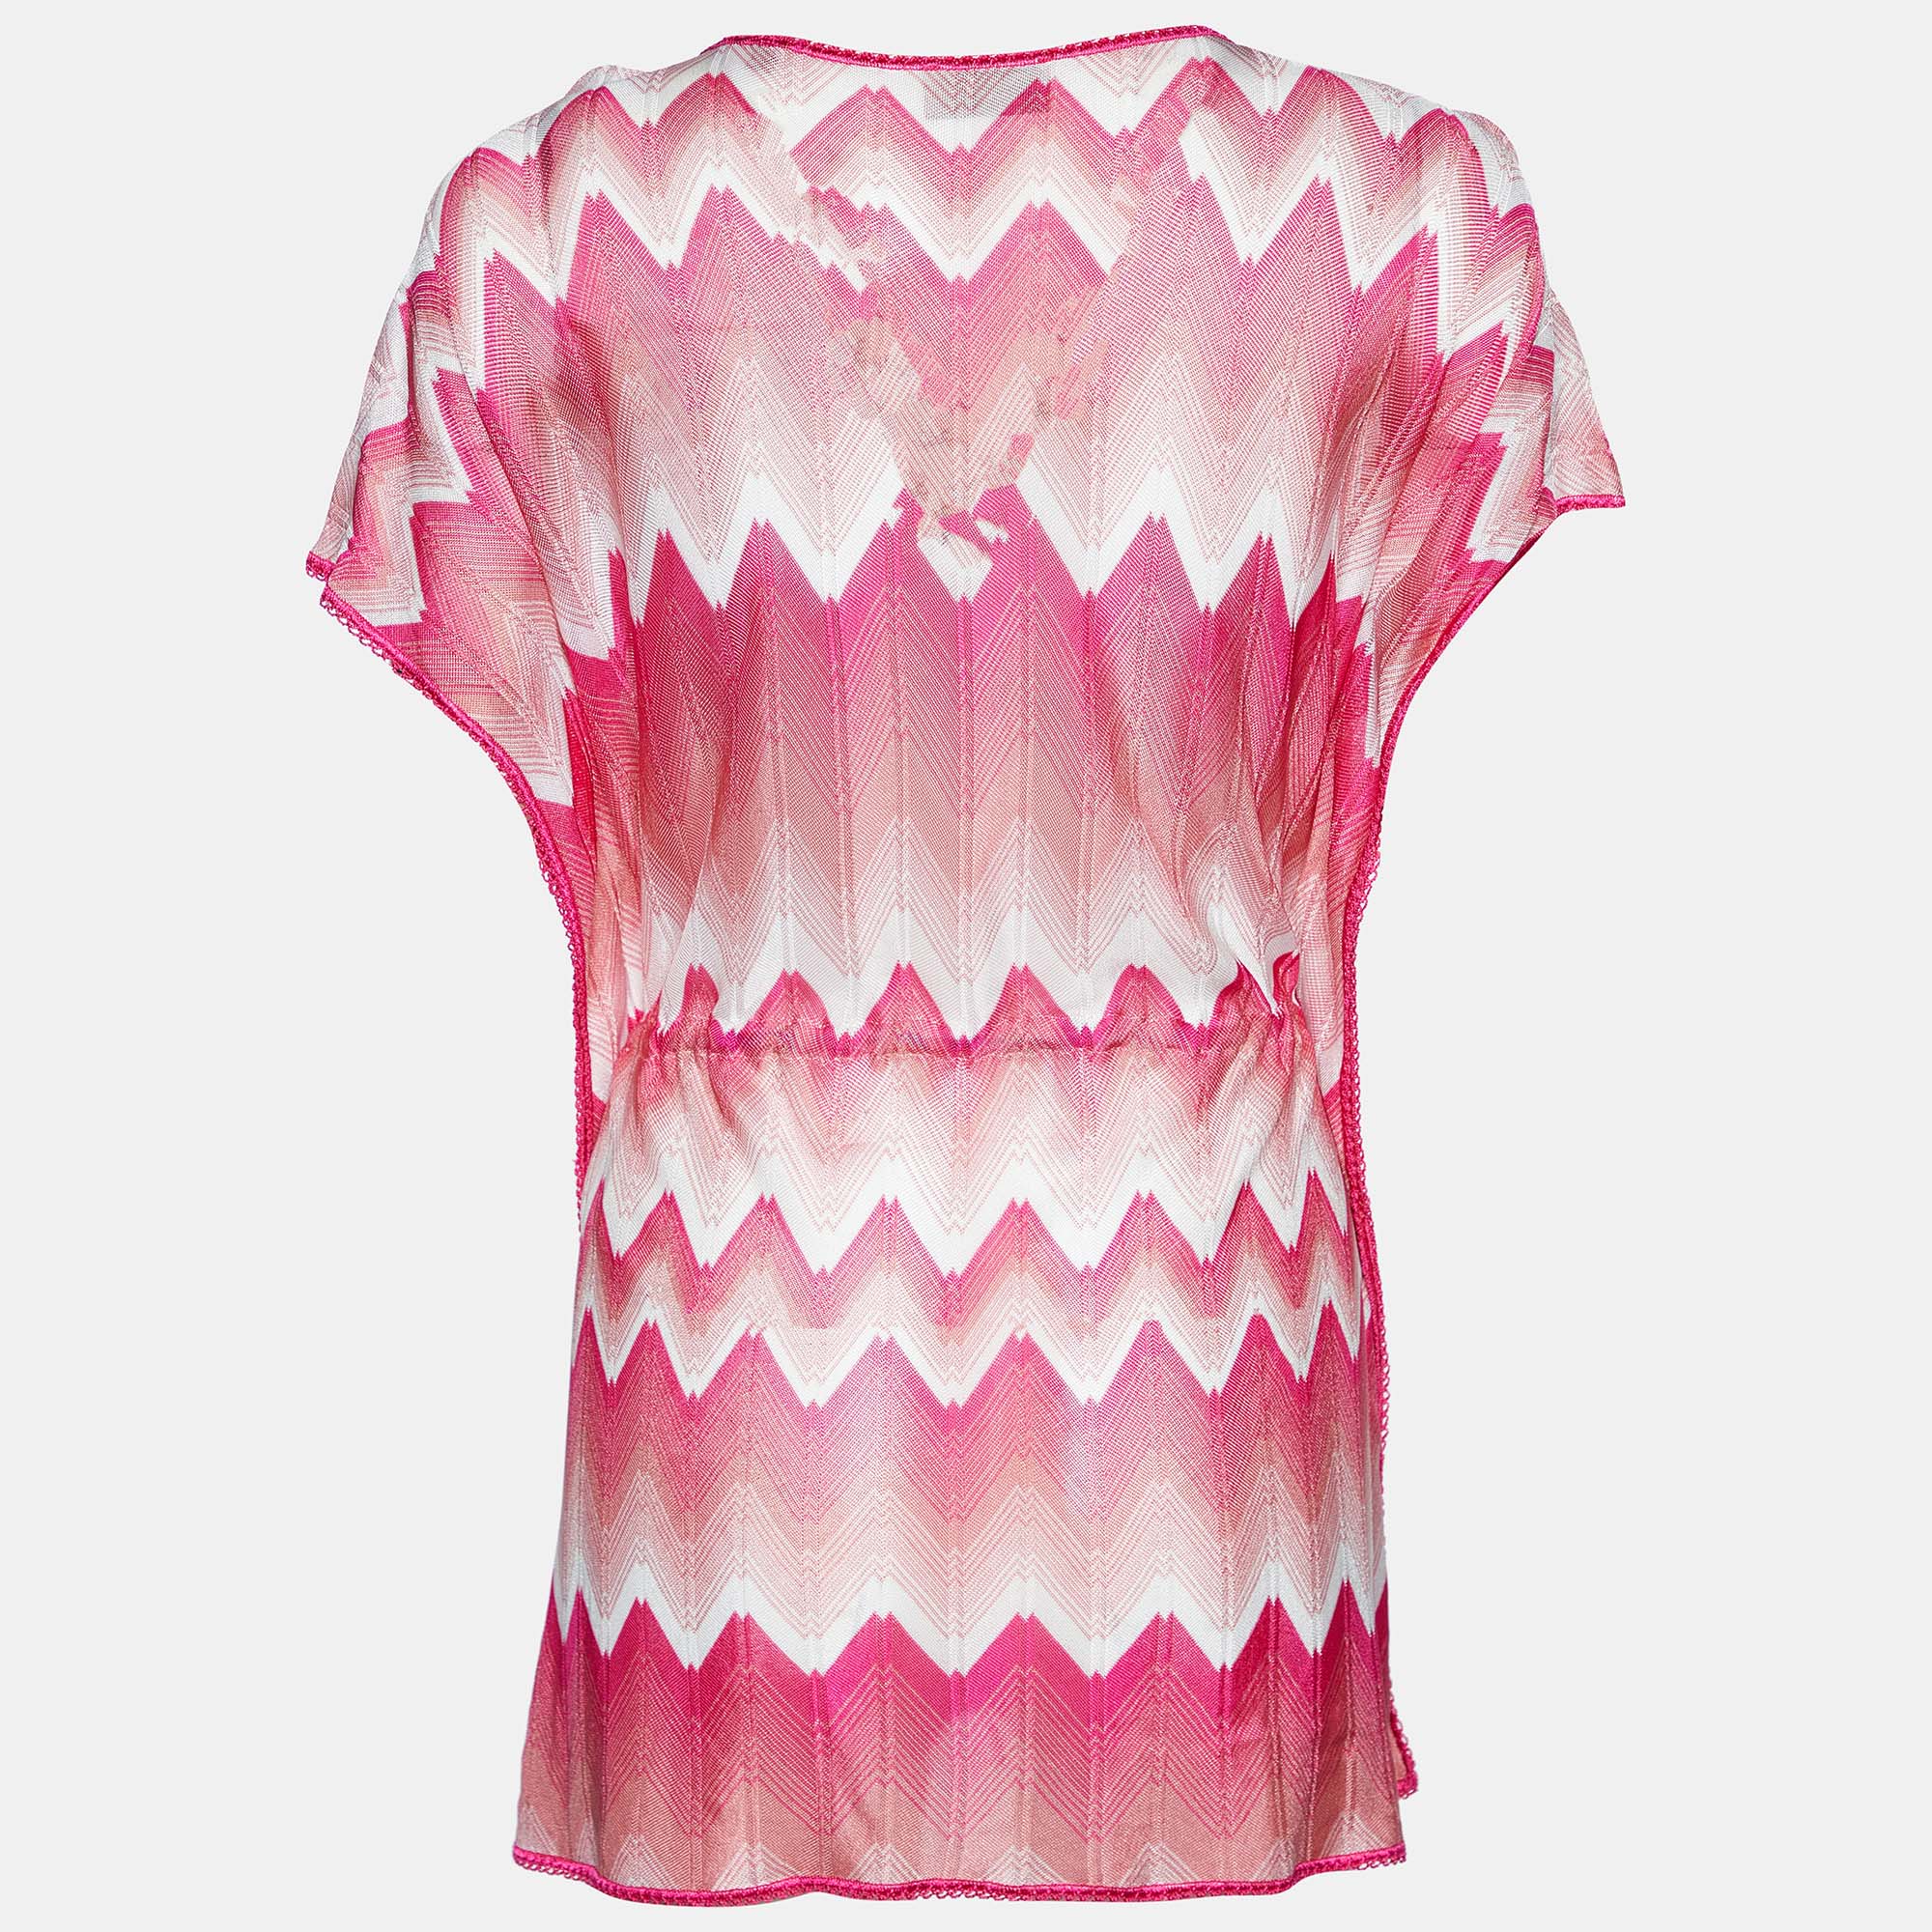 

Missoni Mare Pink Zig Zag Patterned Knit Tie Detail Top